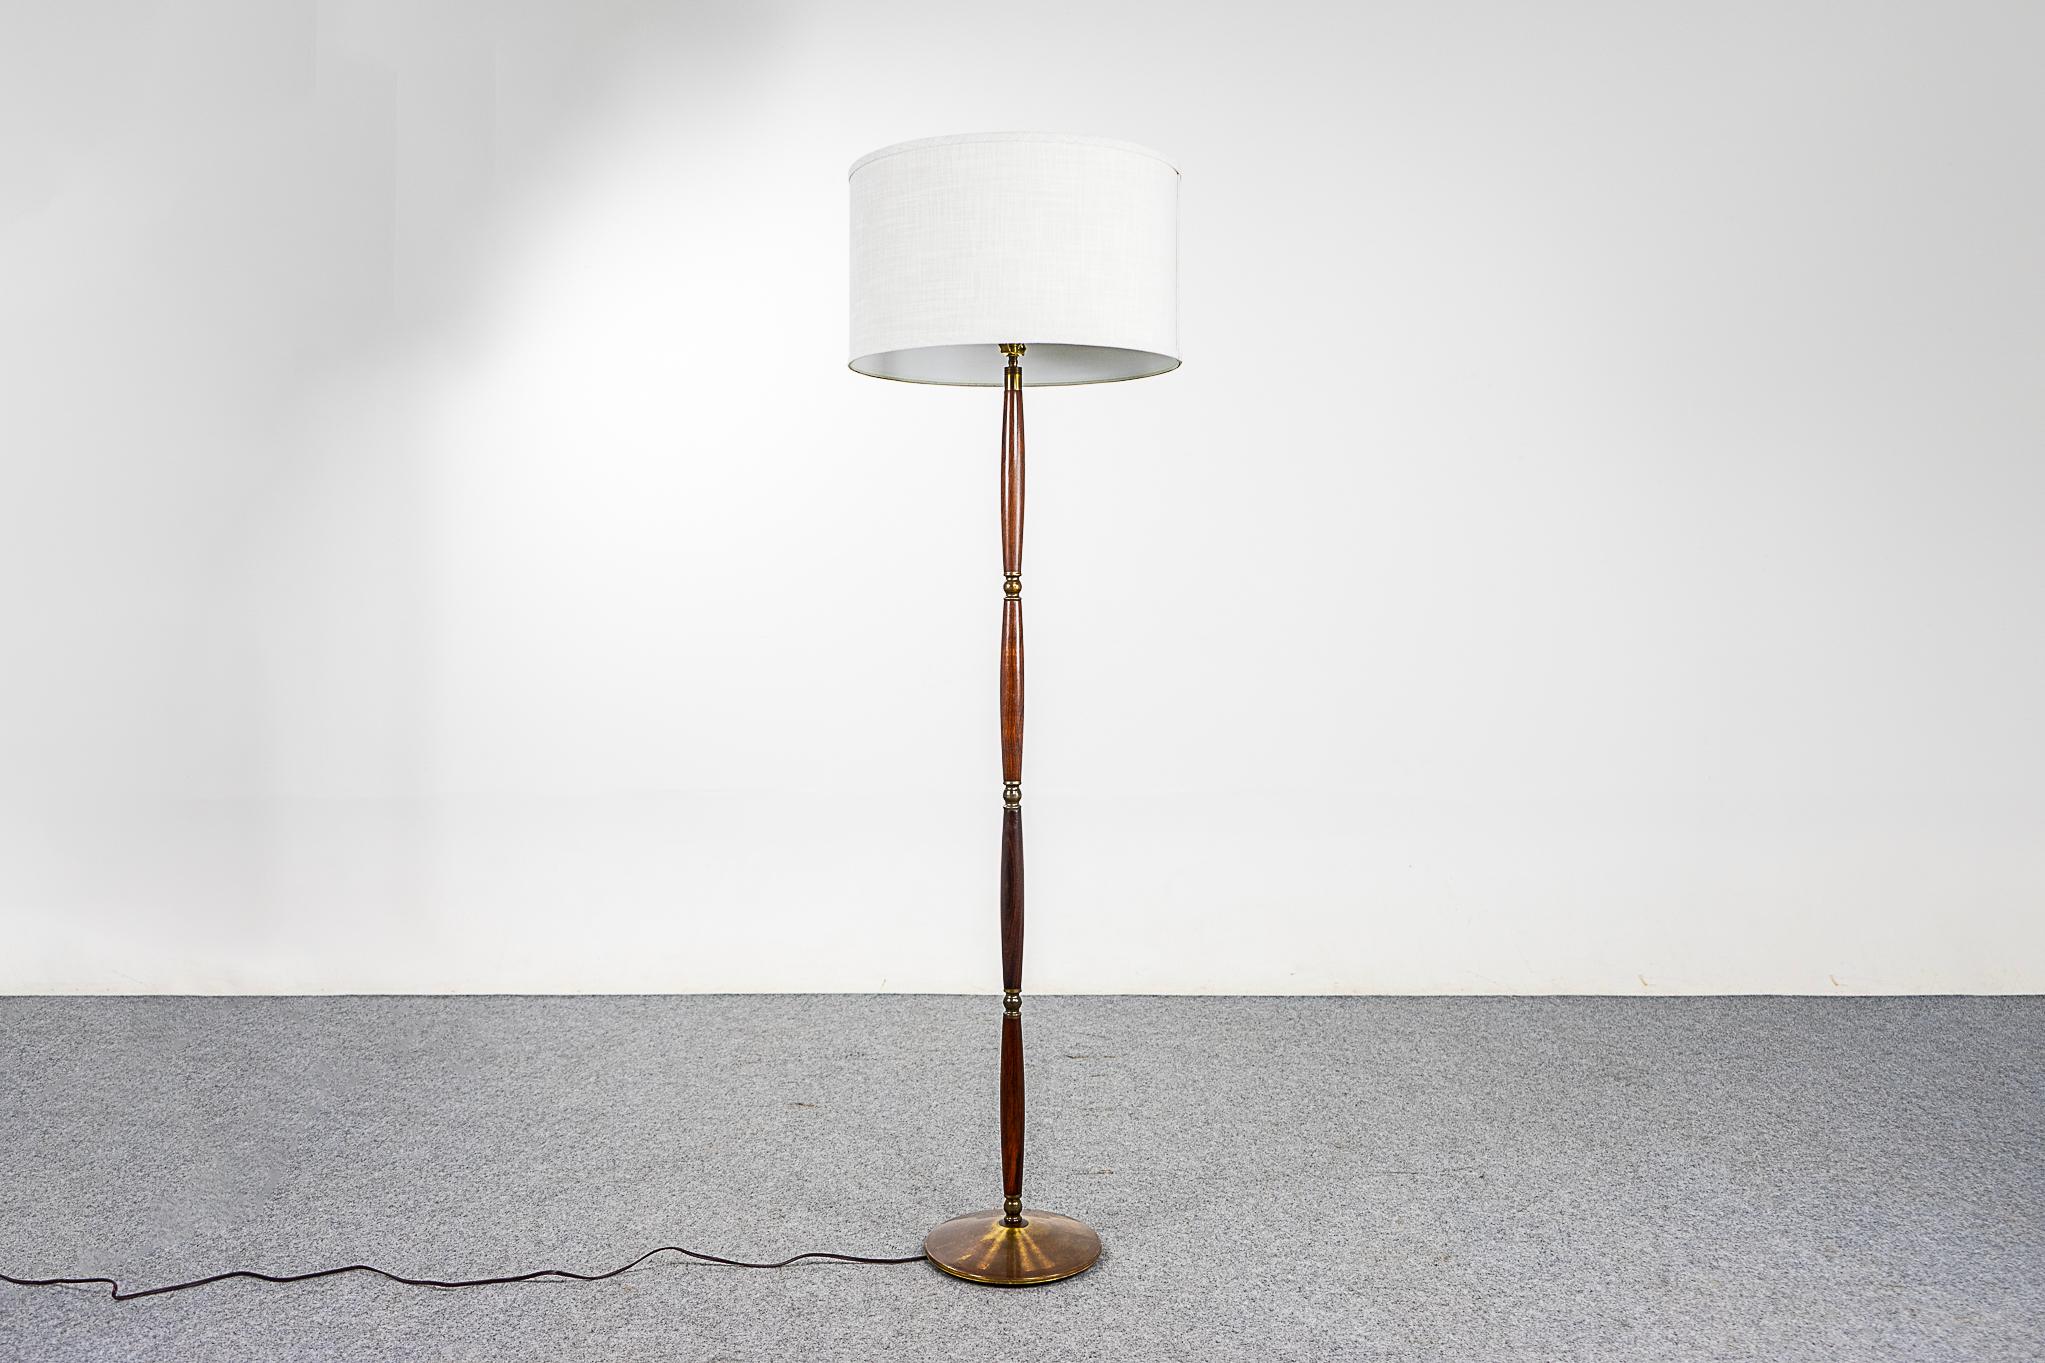 Rosewood & brass Danish floor lamp, circa 1960's. Beautiful solid rosewood construction with metal base and accents Custom quality fabric shade. New tri-light socket allows for 3 brightness levels, rewired for 110V. Light up your life!

Please